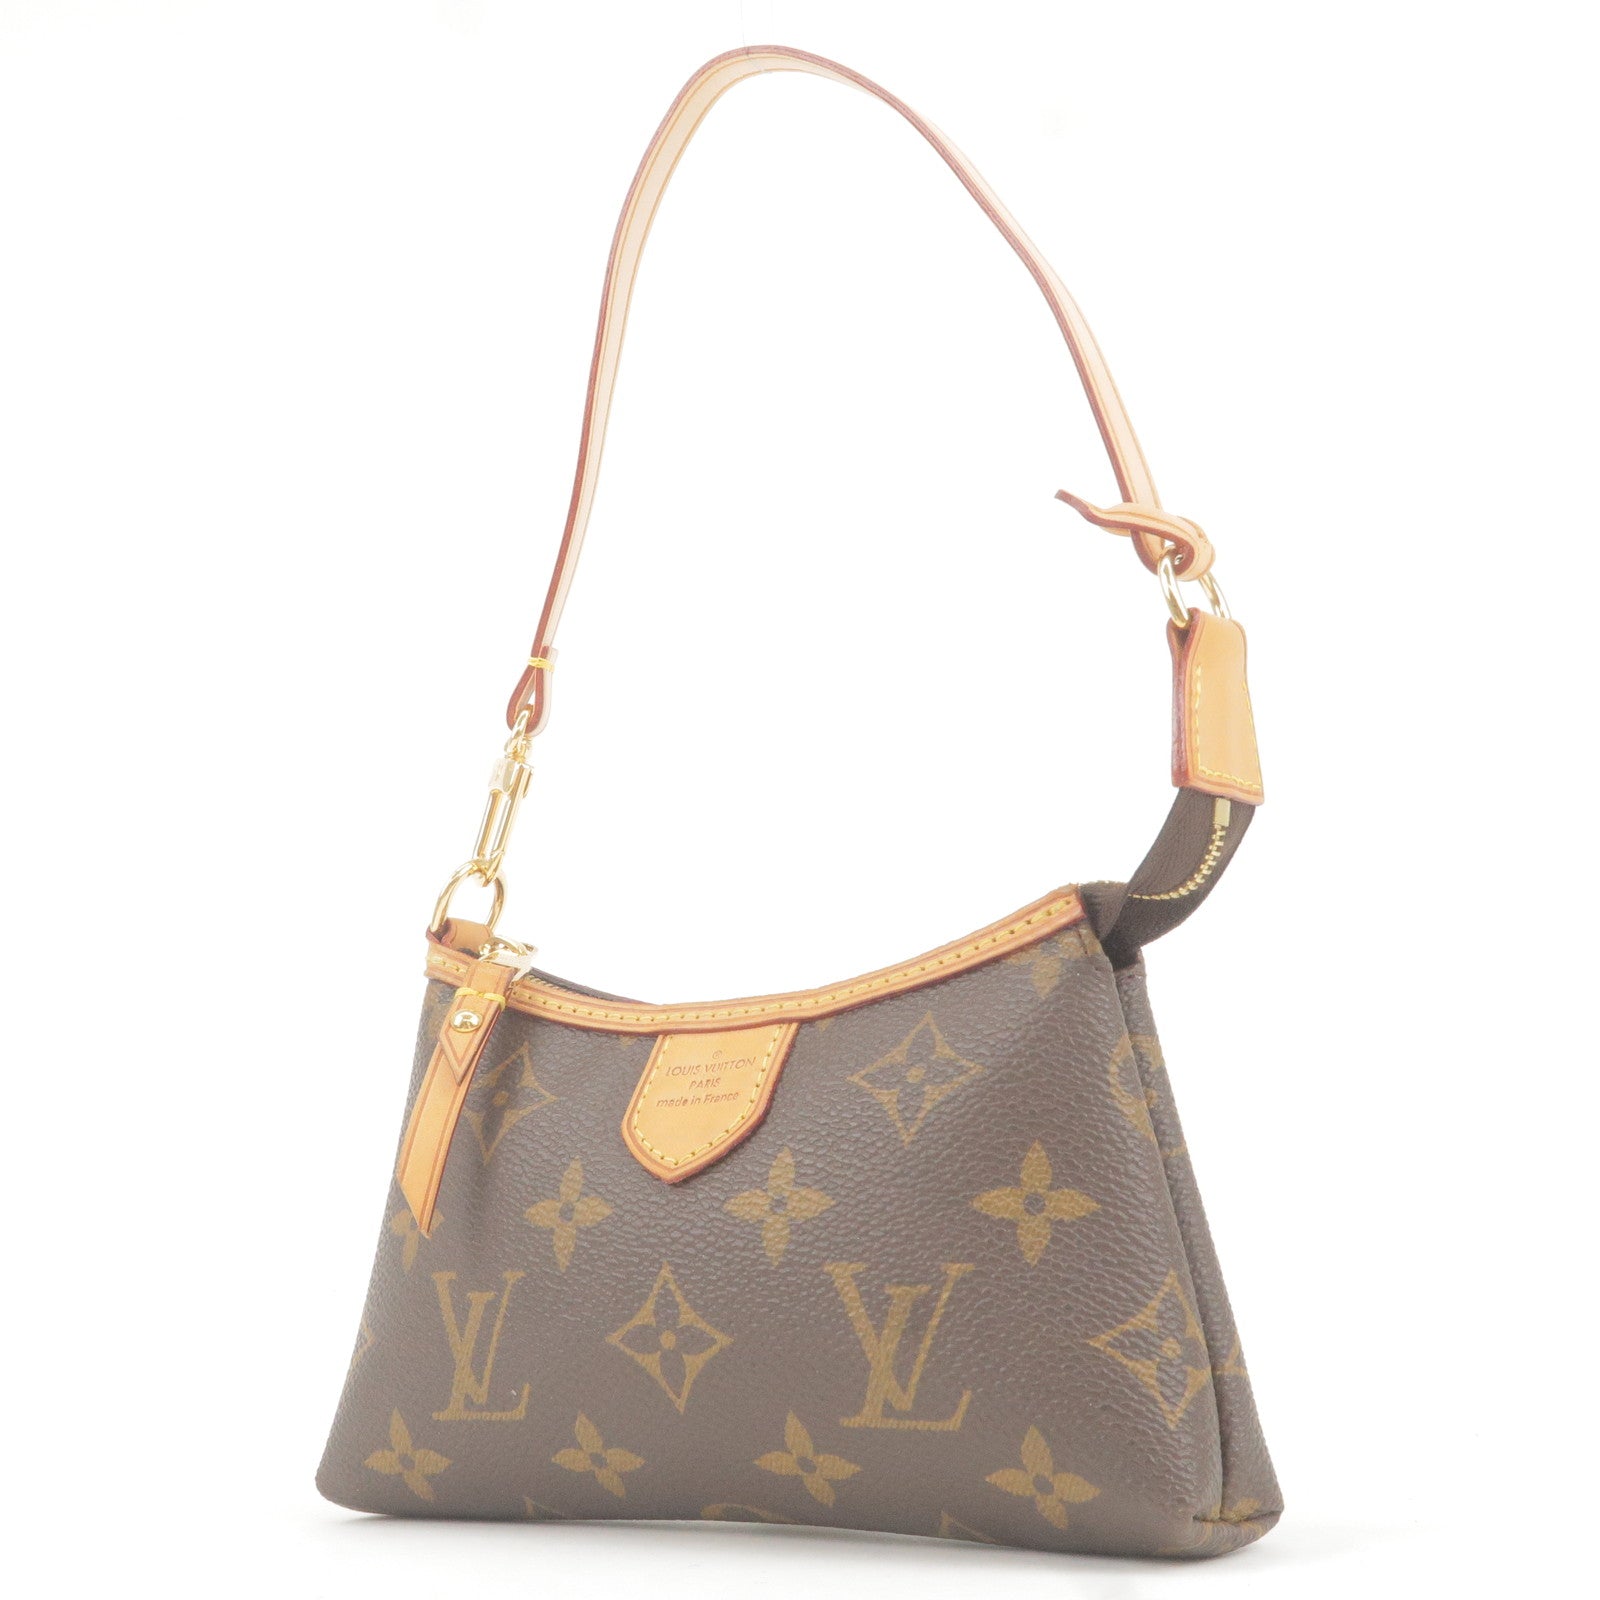 LOUIS VUITTON Red Tan Patent Pre Loved Monogram Small Tote Purse